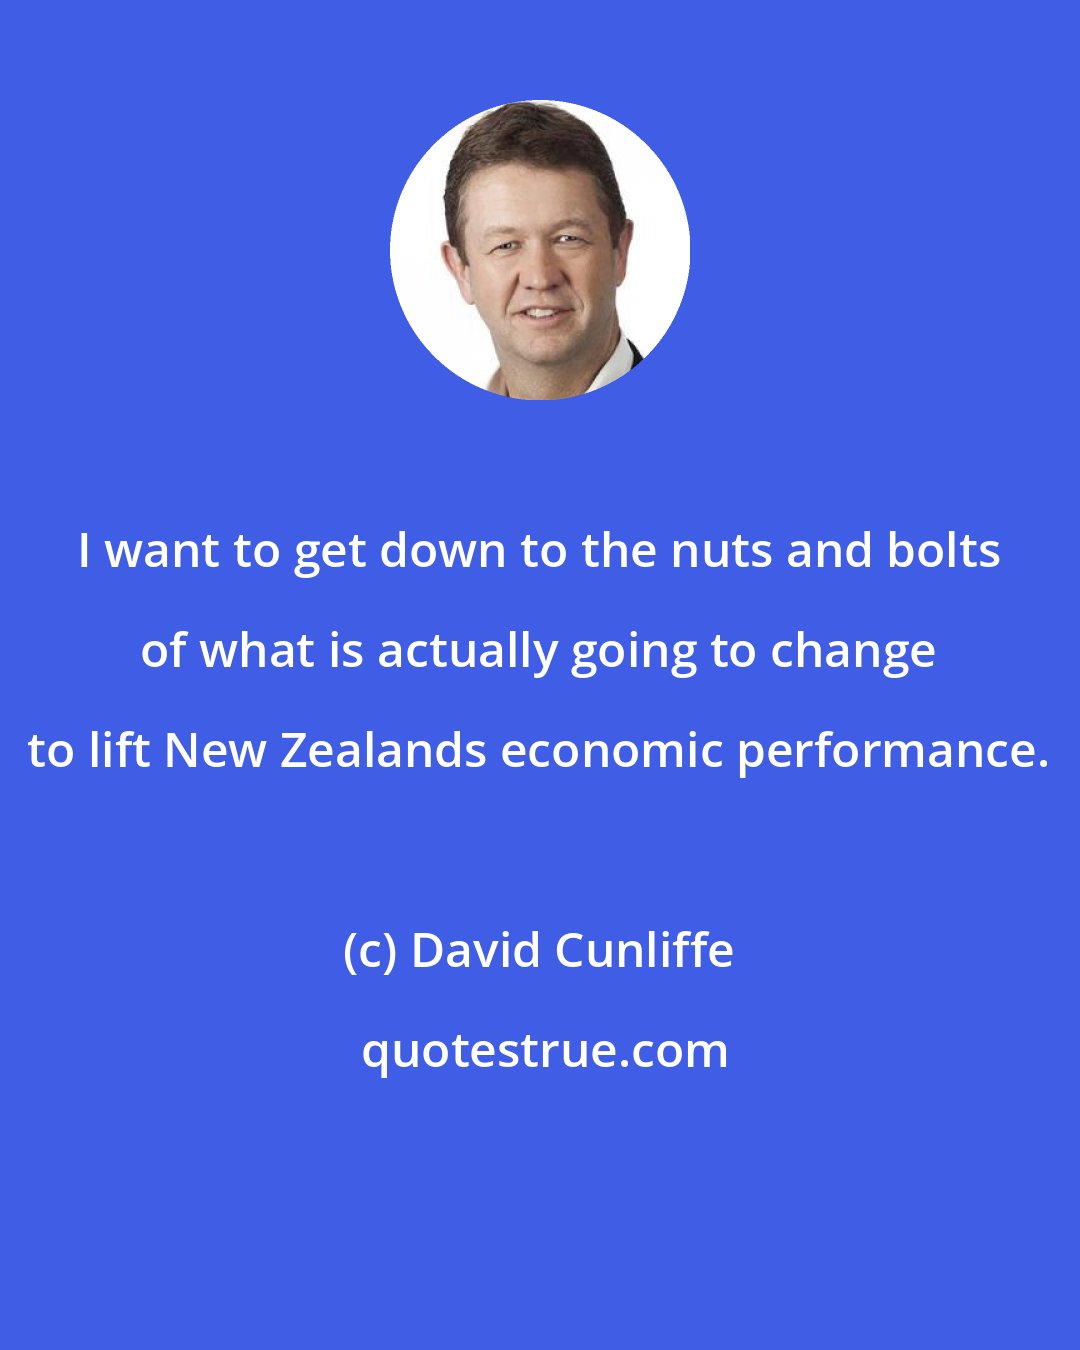 David Cunliffe: I want to get down to the nuts and bolts of what is actually going to change to lift New Zealands economic performance.